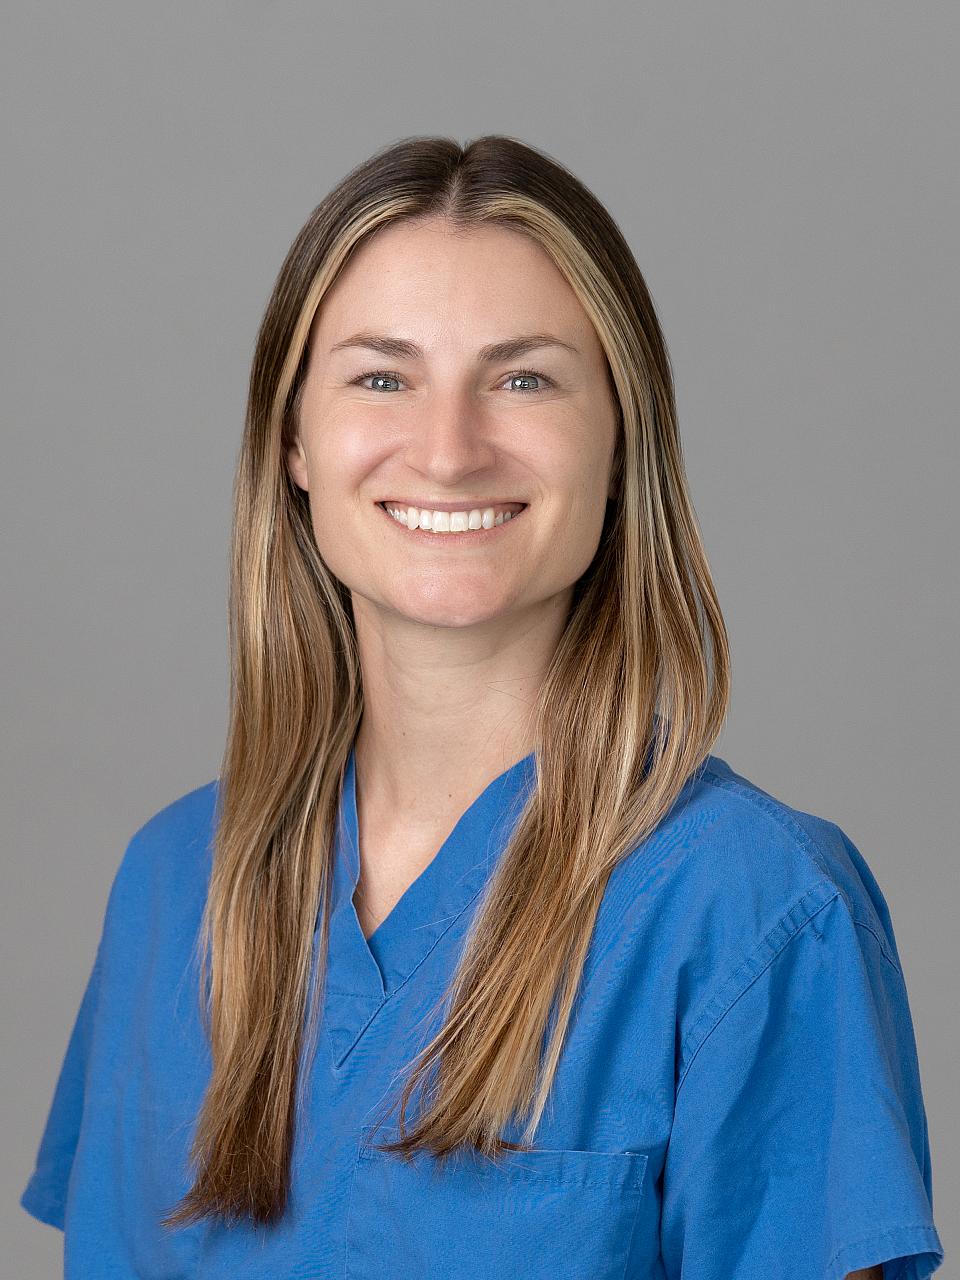 Photo of a woman, Dr. Tally Desmarais, with long light brown hair smiling and looking at the camera wearing blue scrubs.